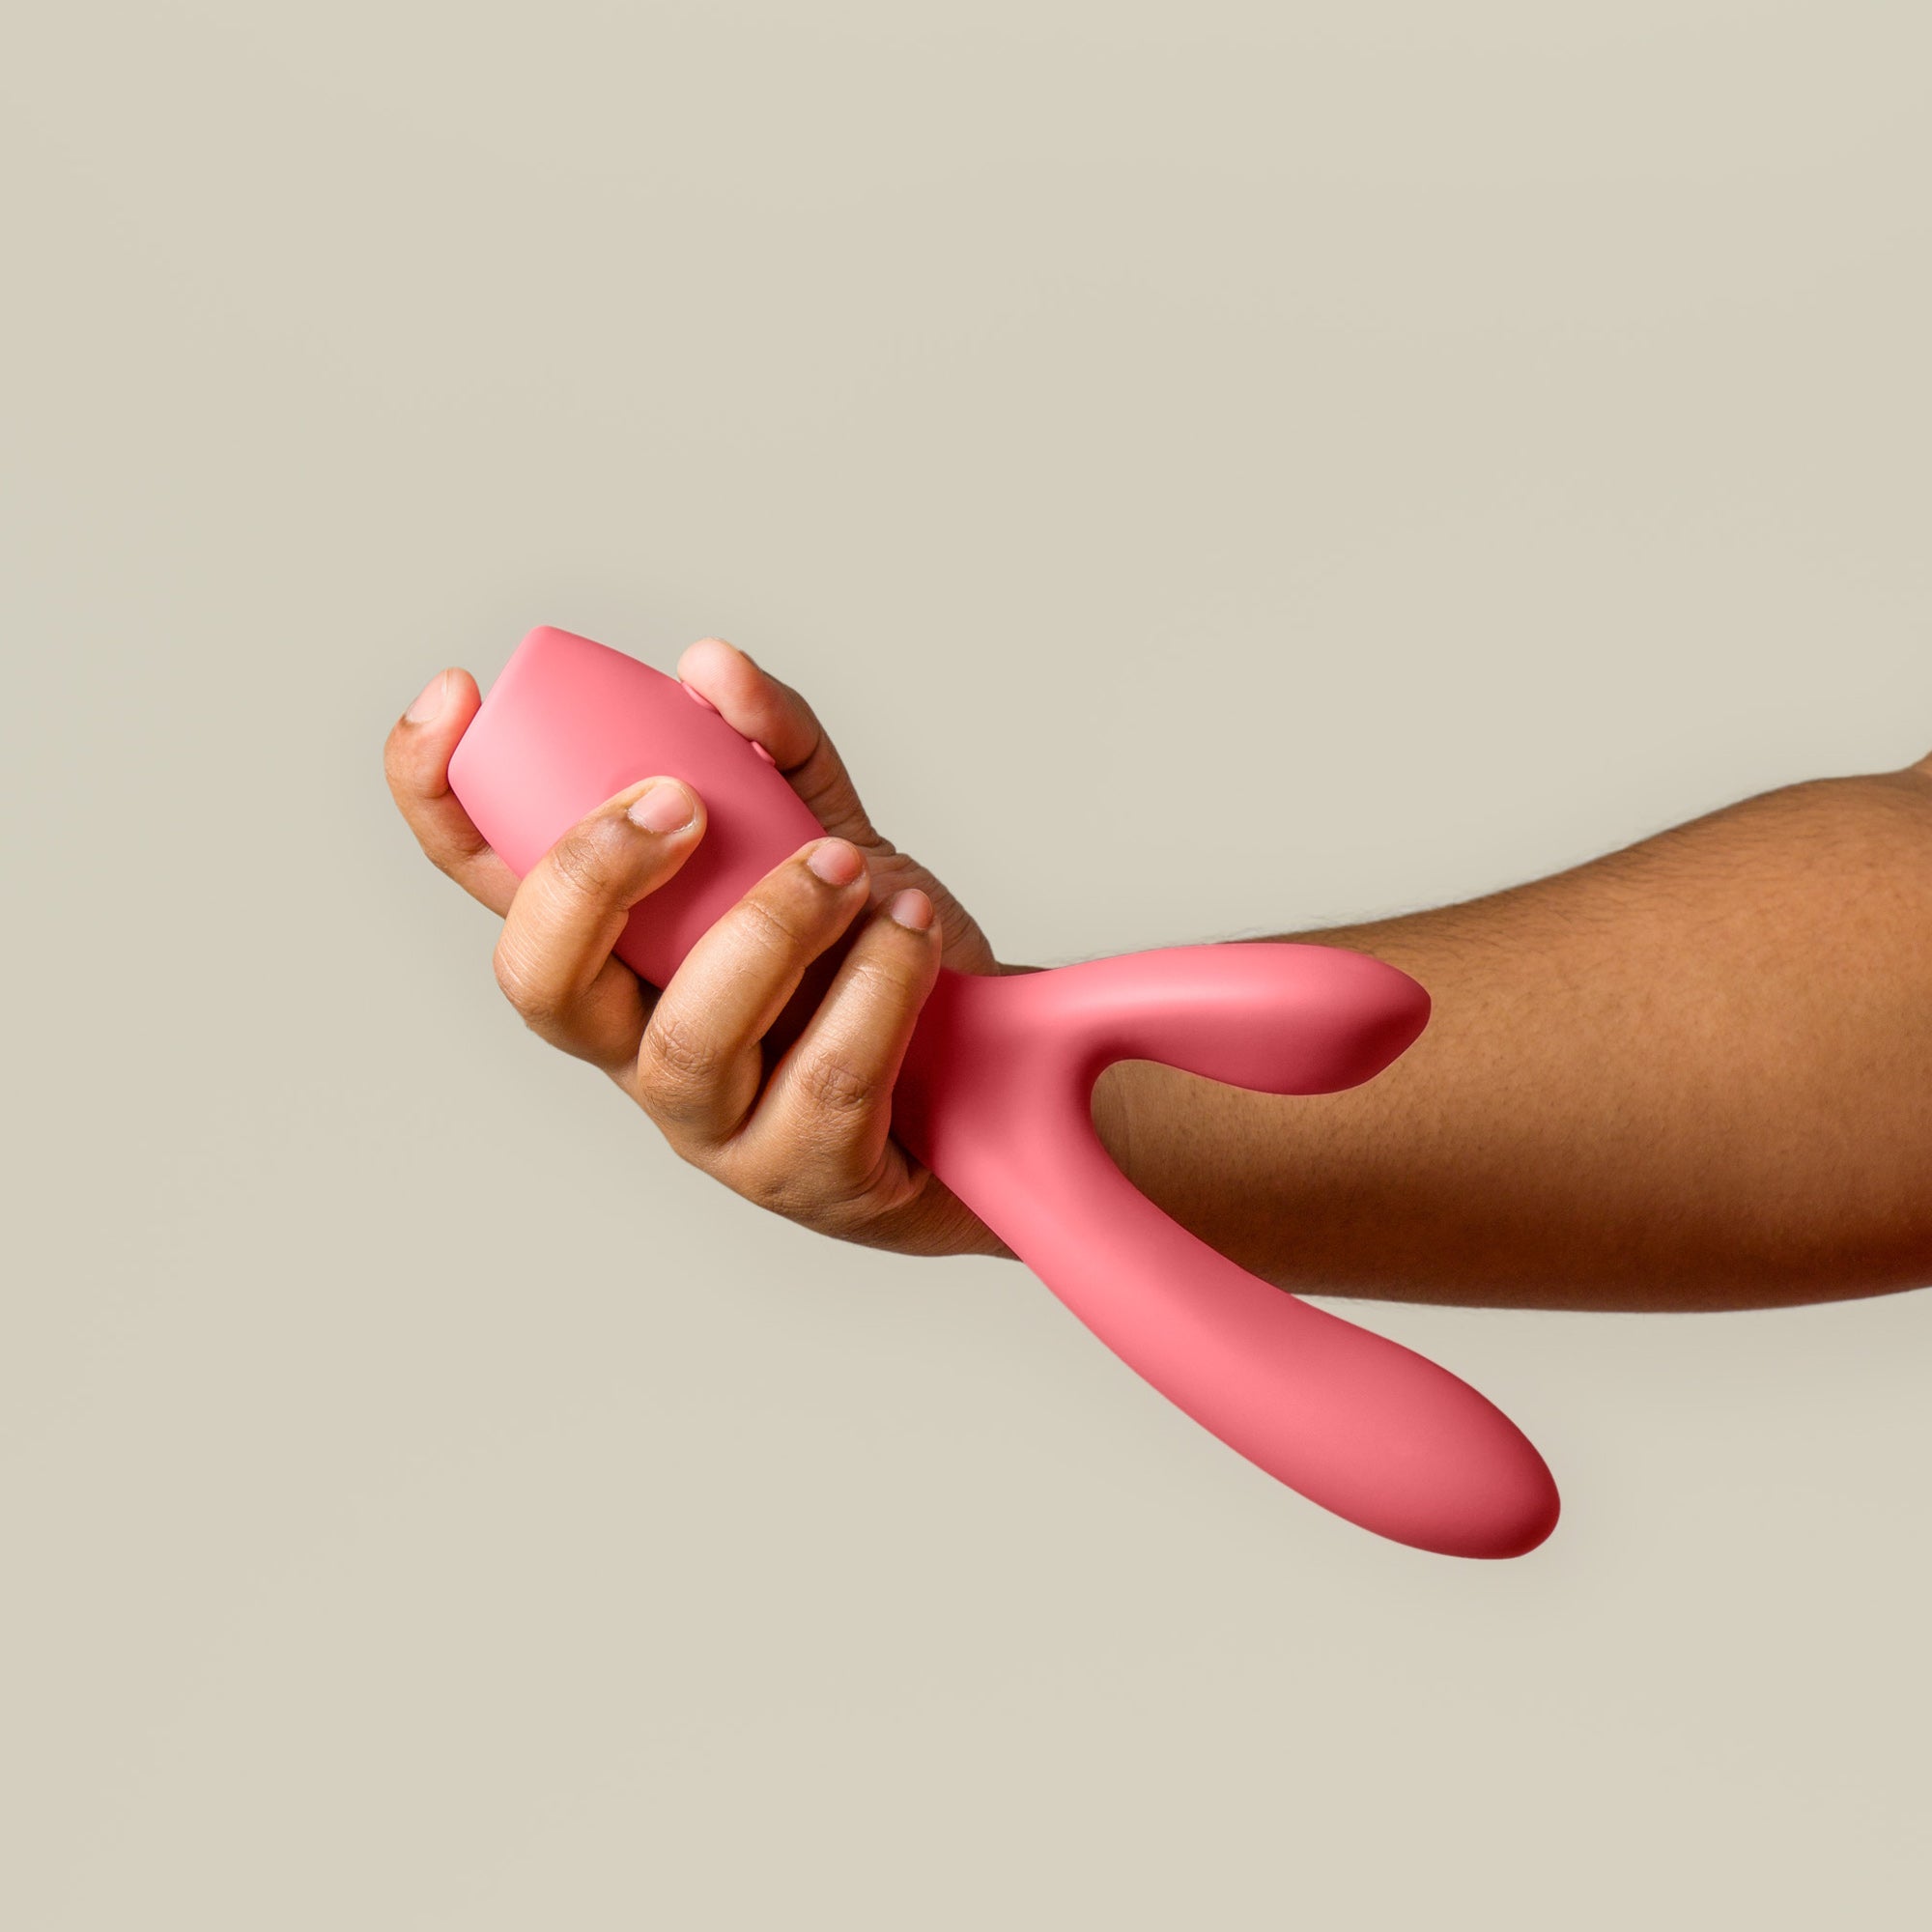 Smile Makers The Artist -Stimulating Dual Vibrator – The Period